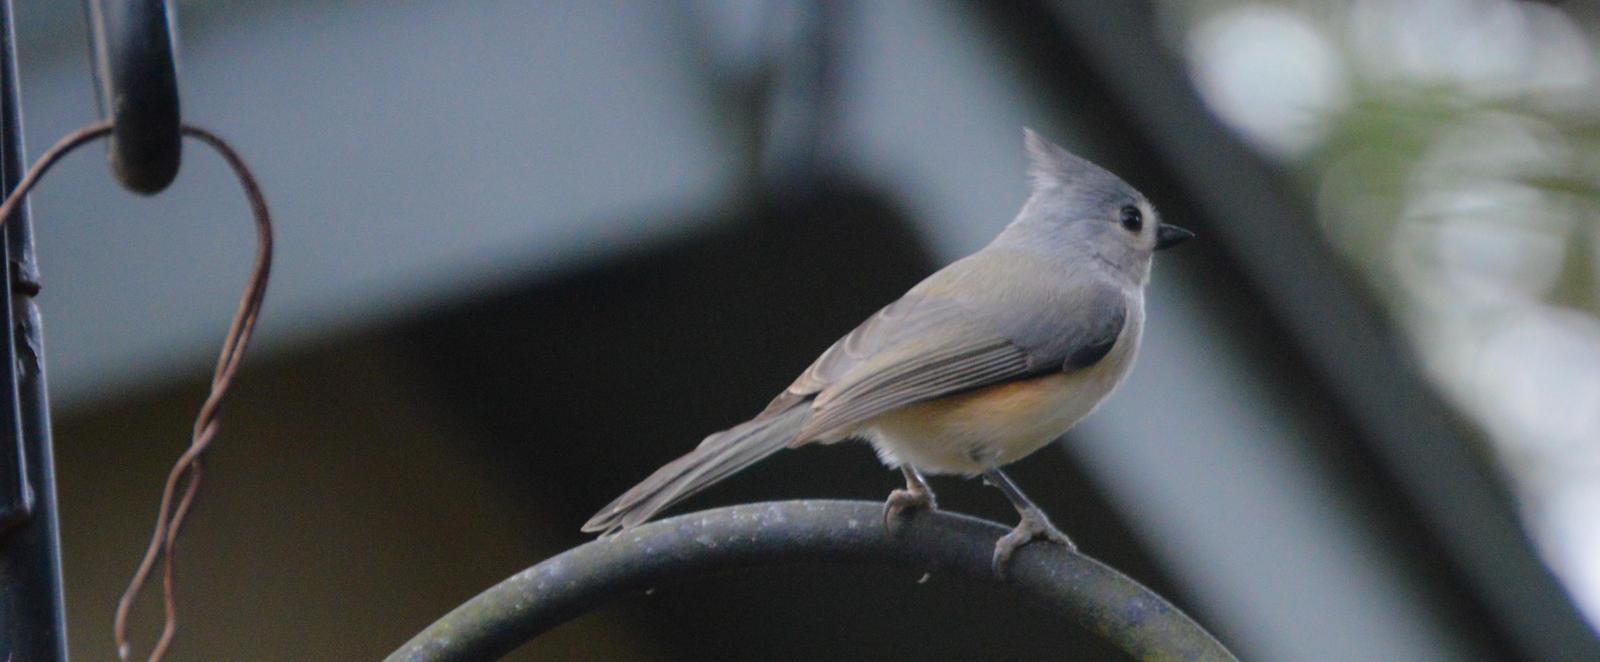 Tufted Titmouse Photo by Mike Ballentine